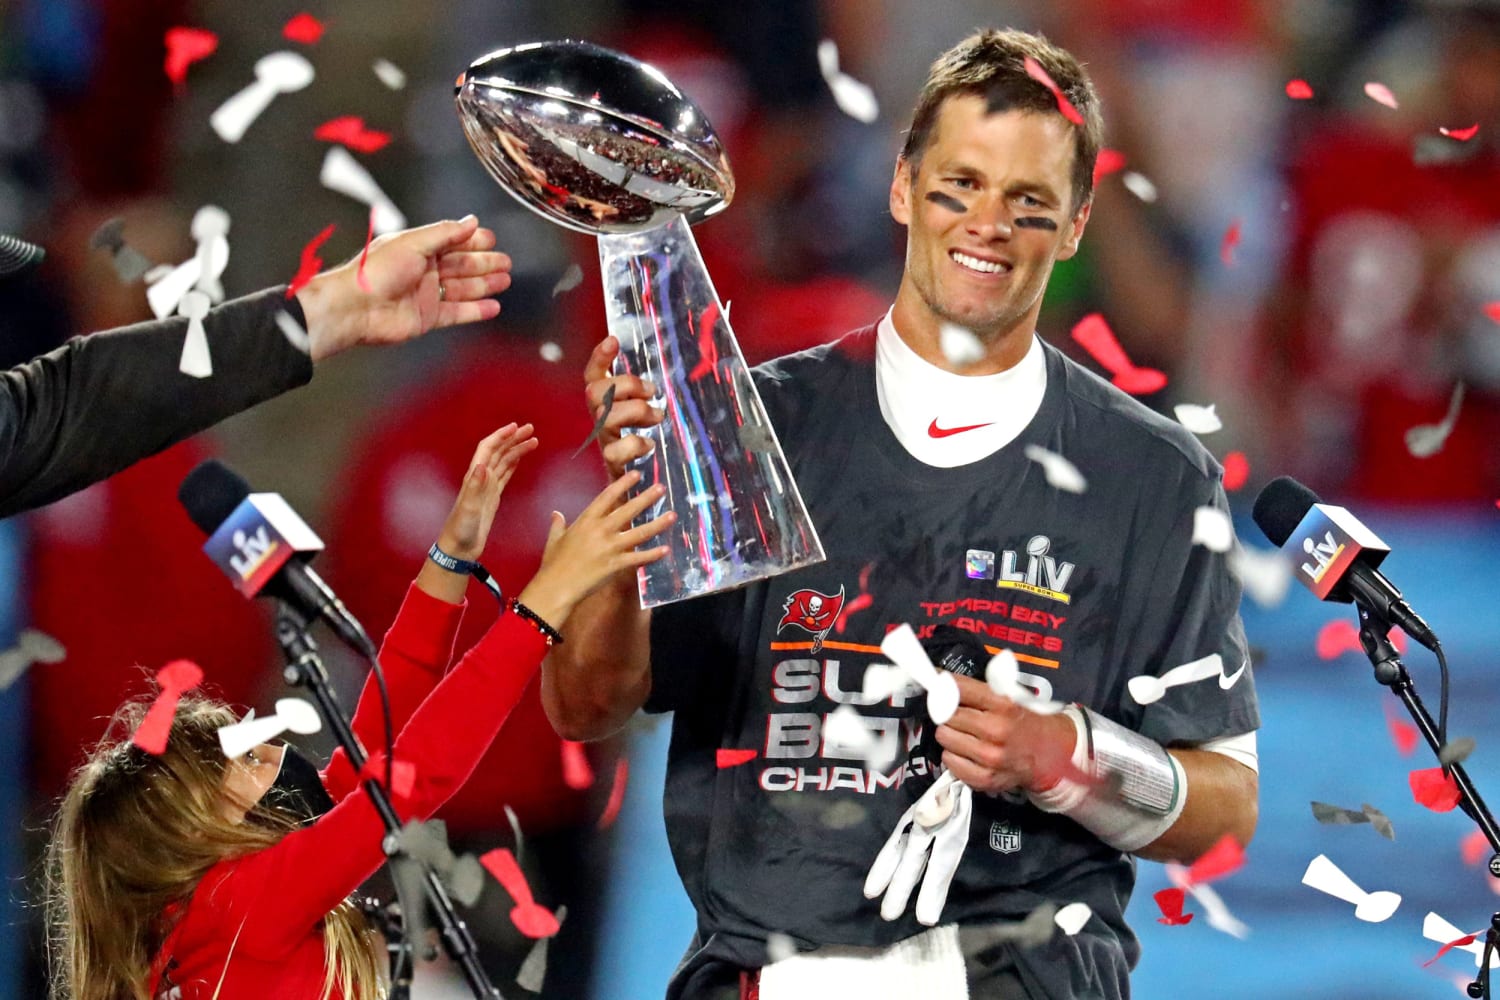 Tom Brady's retirement video was reportedly 'filmed a while ago'